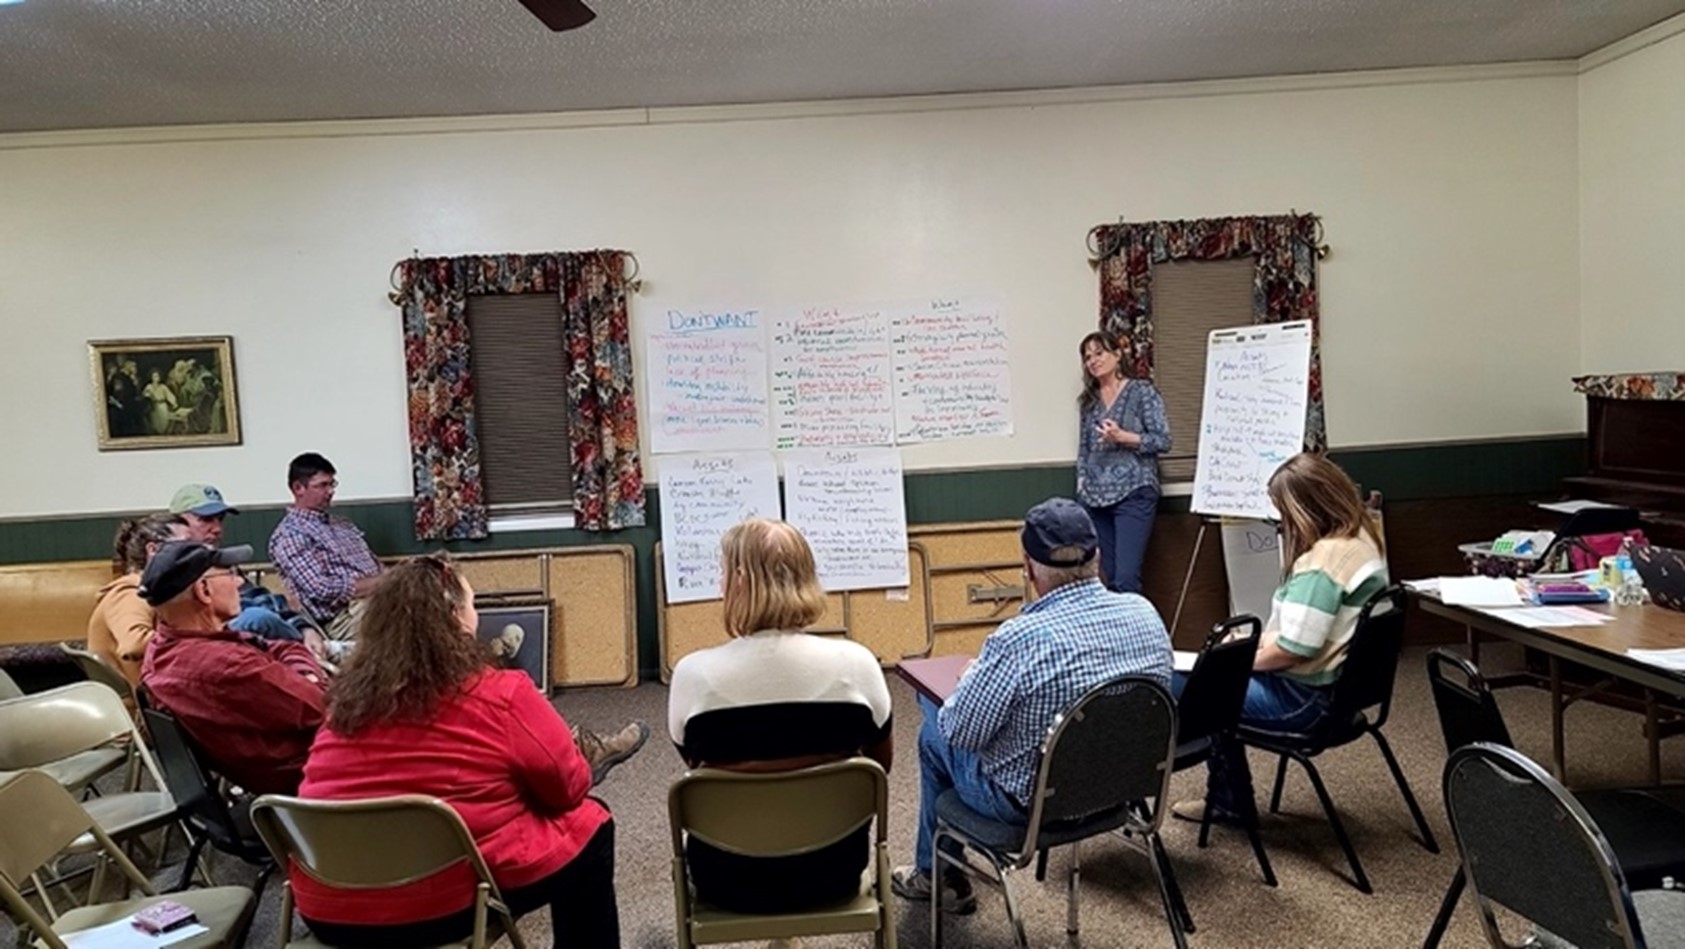 Lori Higgins, University of Idaho Extension, leads a discussion during phase two of the community review.